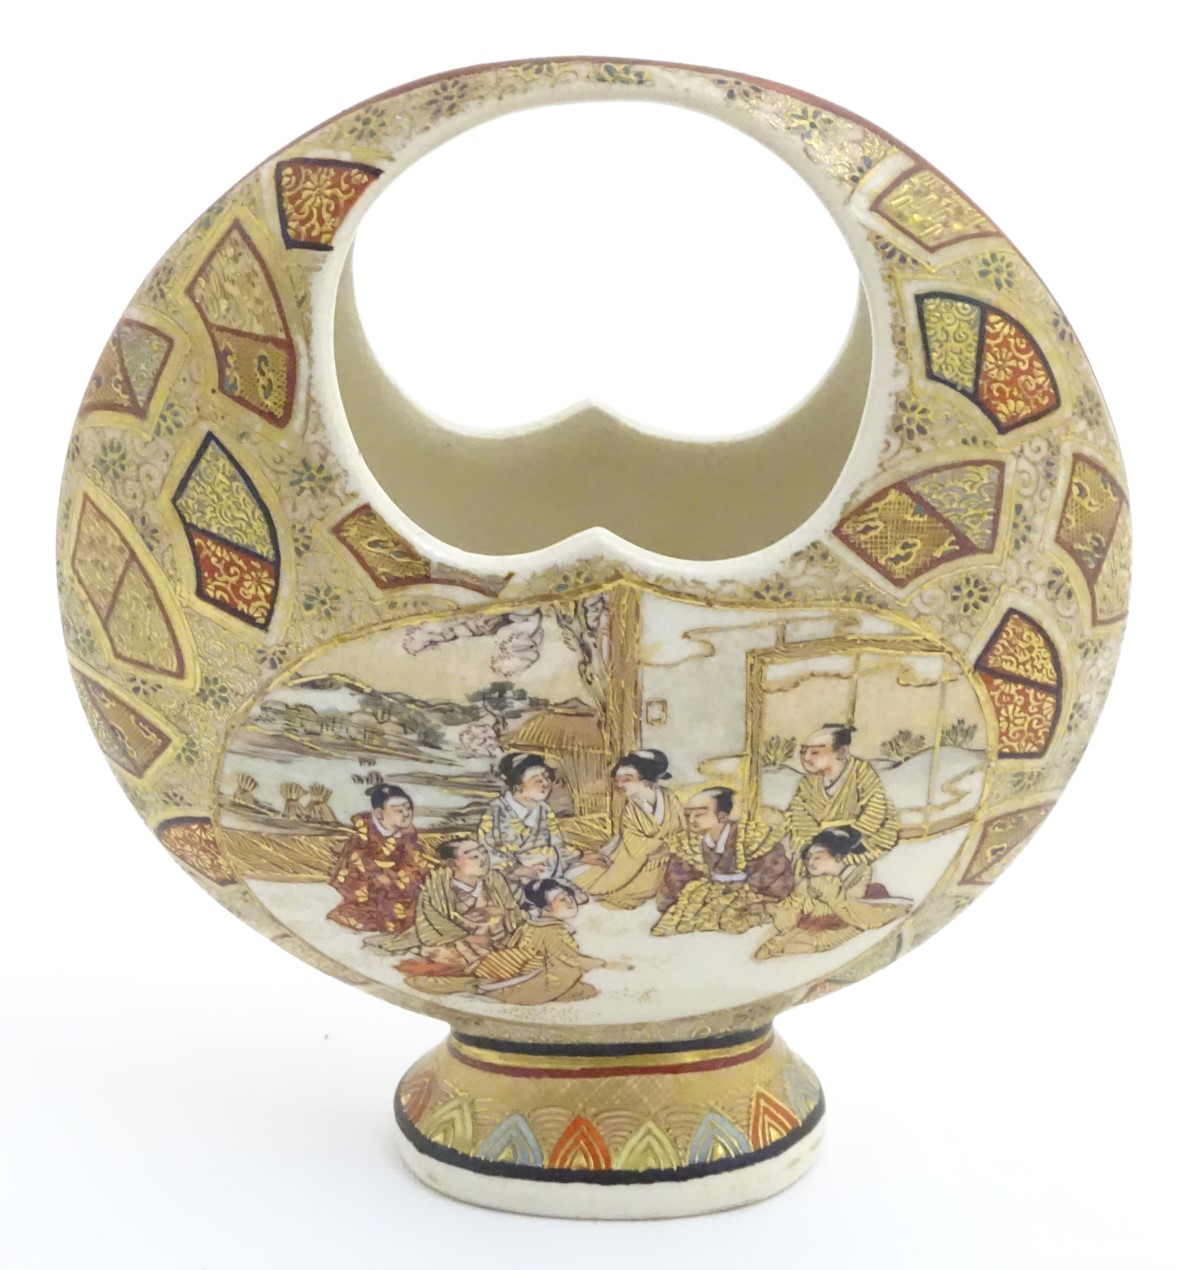 A Japanese satsuma moon basket vase with hand painted decoration depicting figures seated around - Image 5 of 7